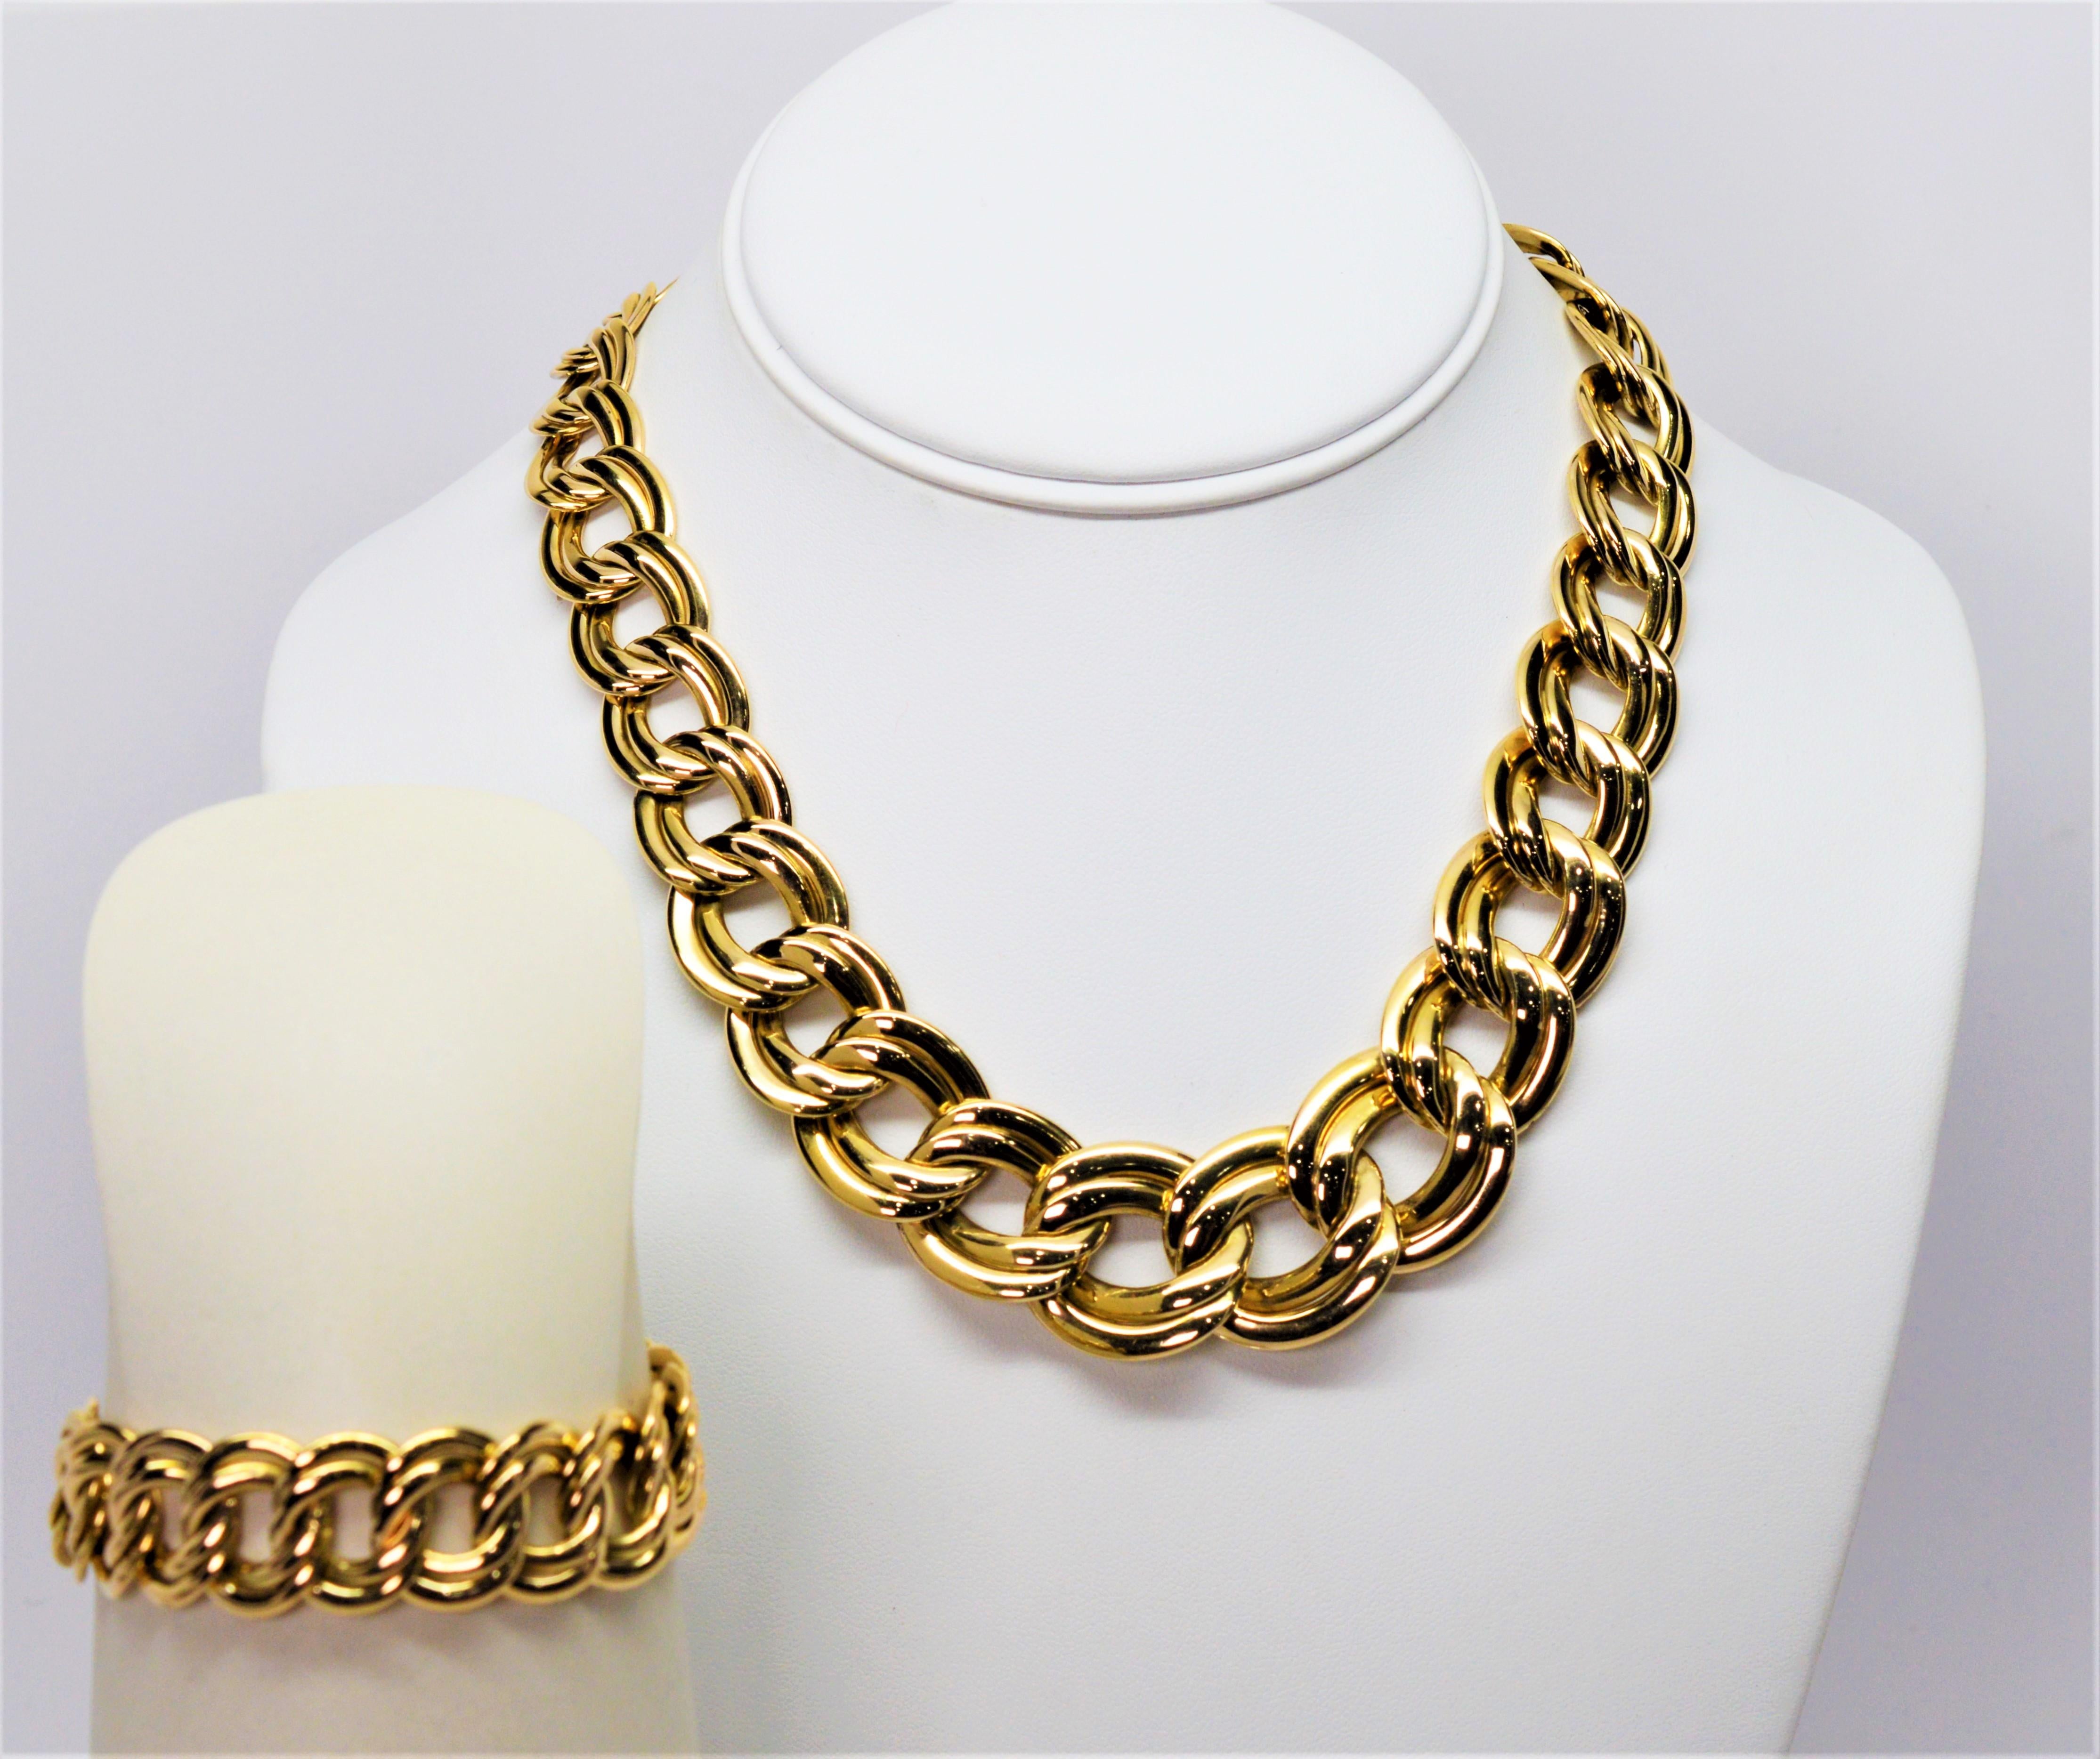 Italian Double Link Chain 14 Karat Yellow Gold Necklace and Bracelet Set 4